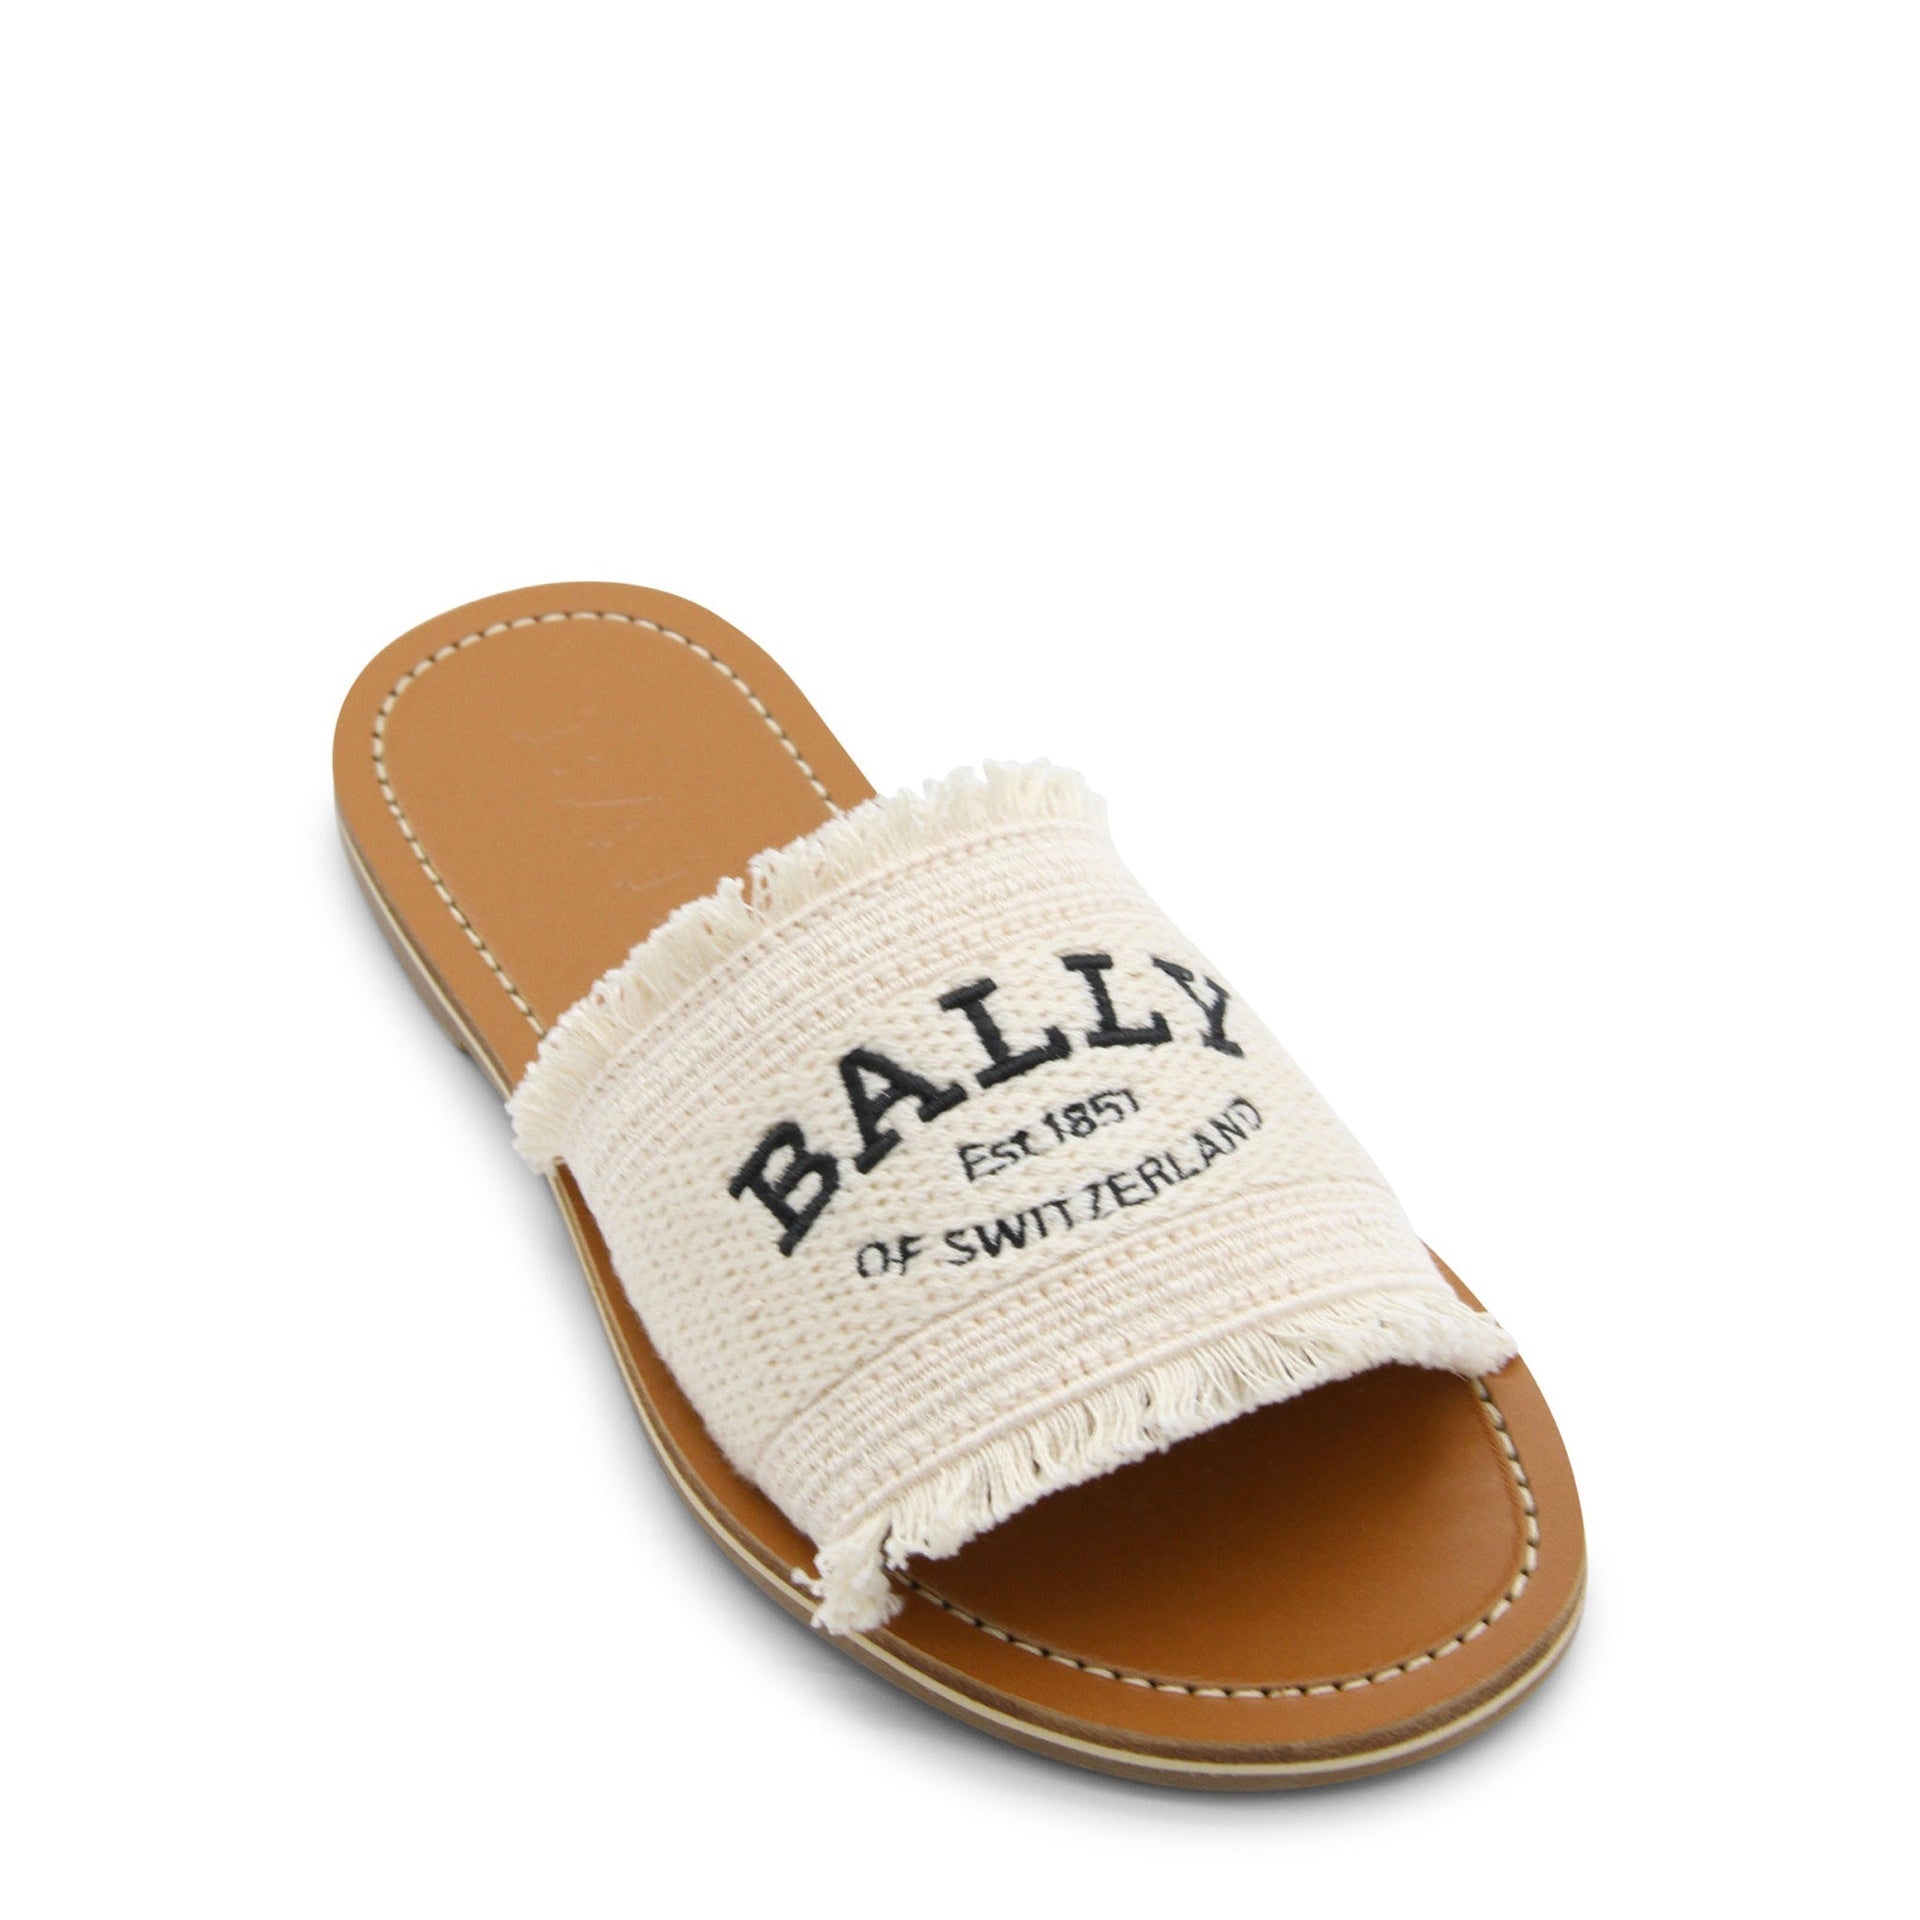 BALLY-OUTLET-SALE-Bally-Logo-Flat-Sandals-Sandalen-ARCHIVE-COLLECTION-2.jpg